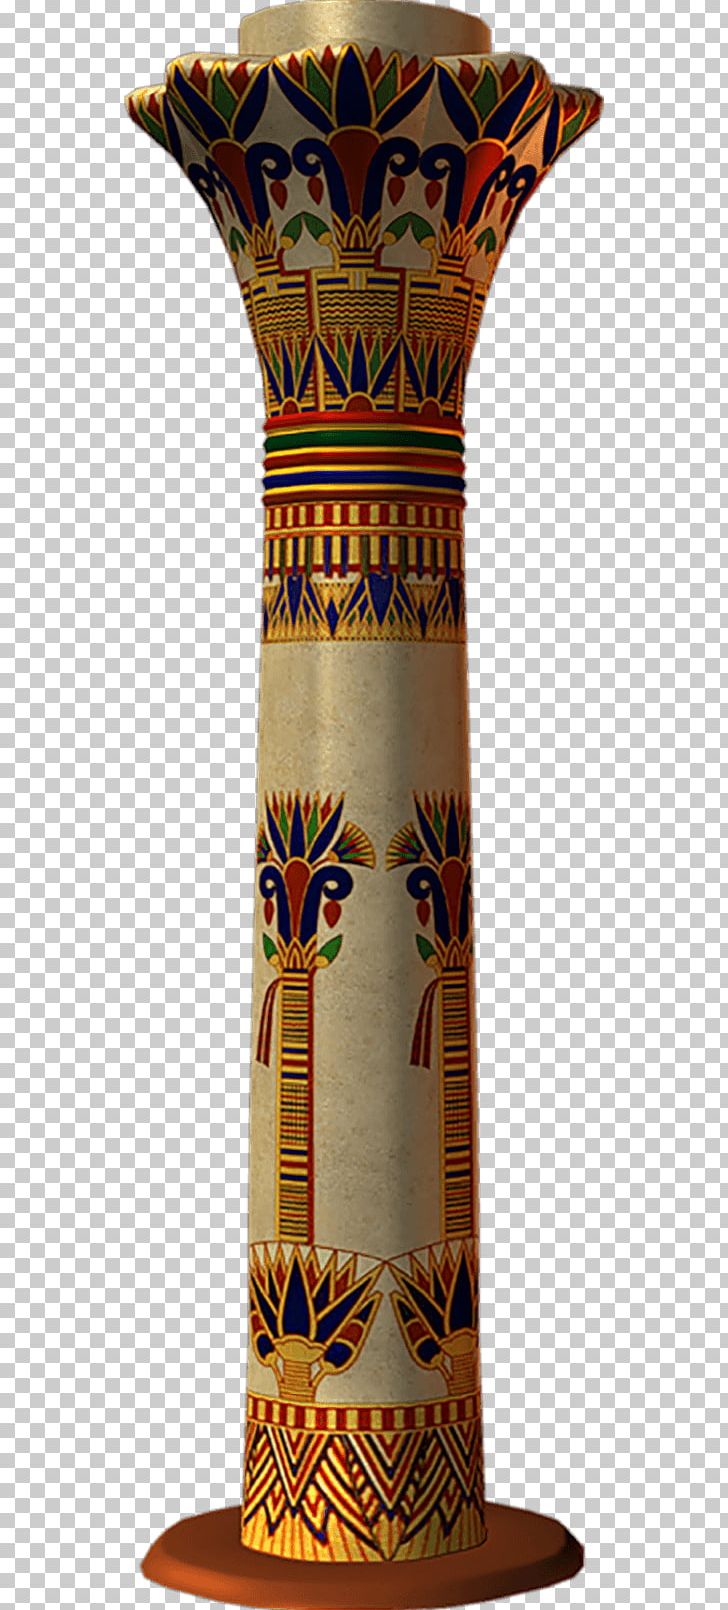 Ancient Egyptian Architecture Column Civilization PNG, Clipart, Ancient Egypt, Ancient Egyptian Architecture, Architecture, Artifact, Civilization Free PNG Download